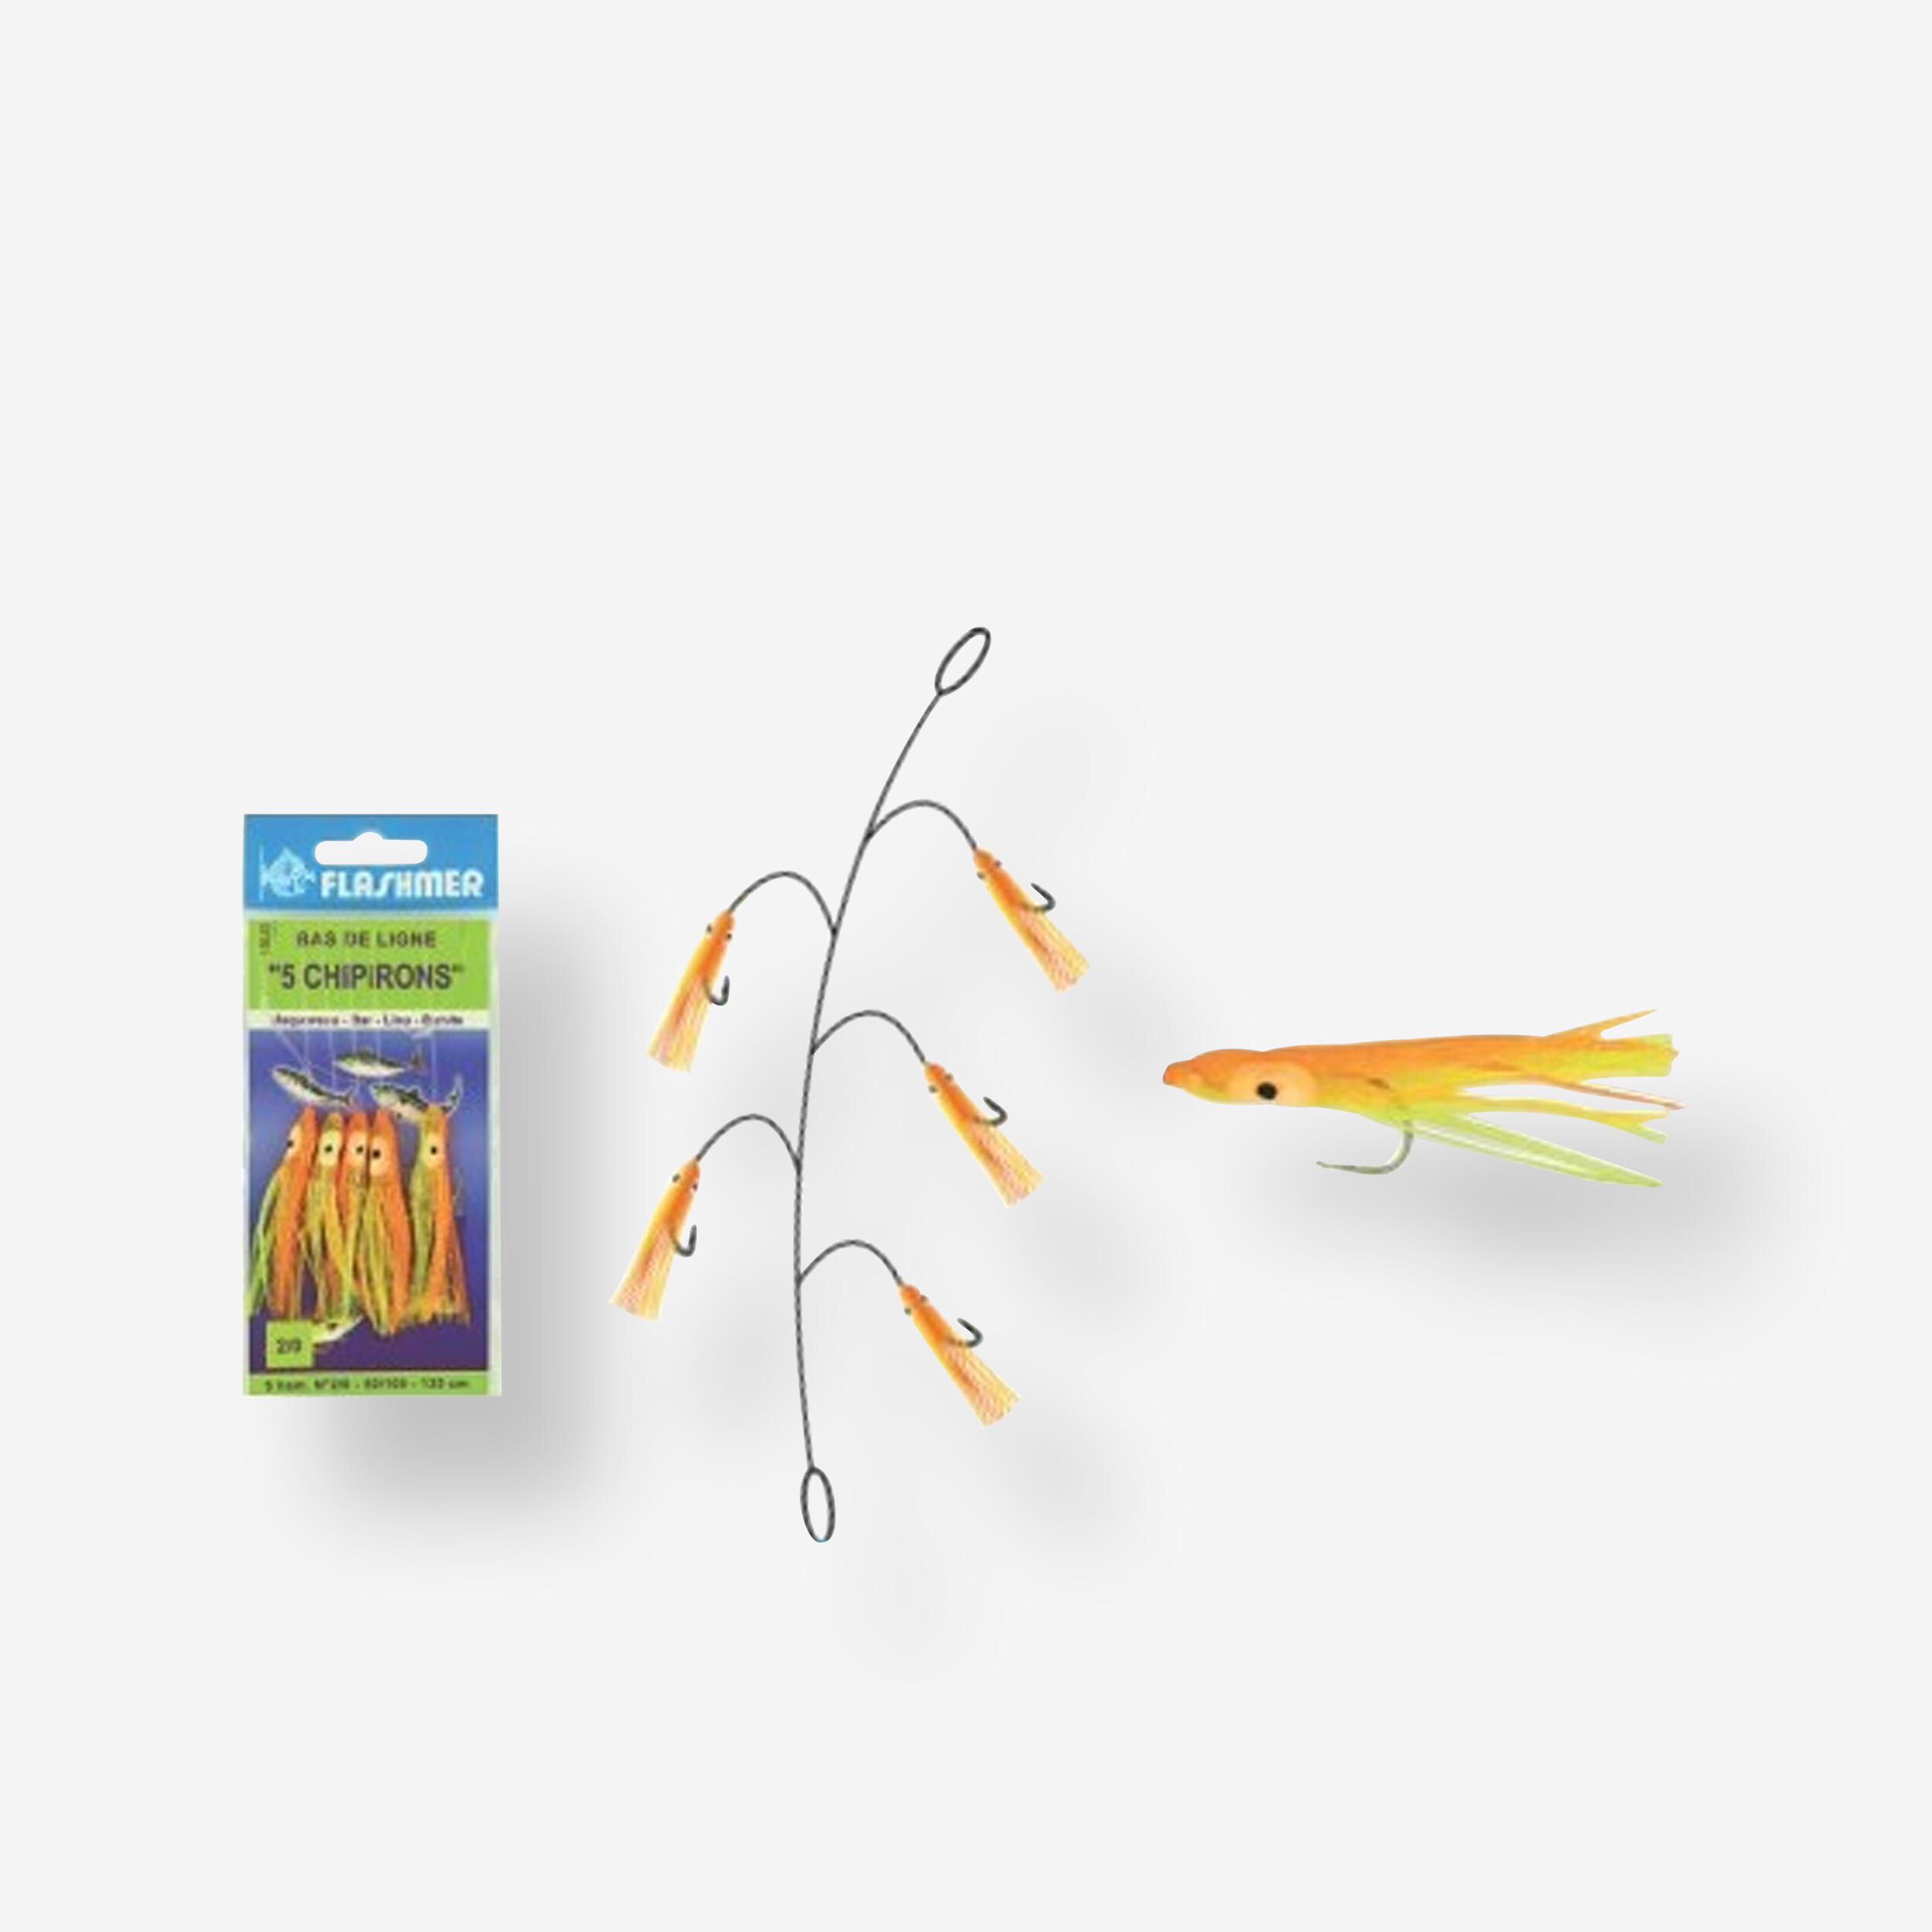 FLASHMER Lure fishing rigged line 5 CHIPIRONS with five hooks No. 2/0